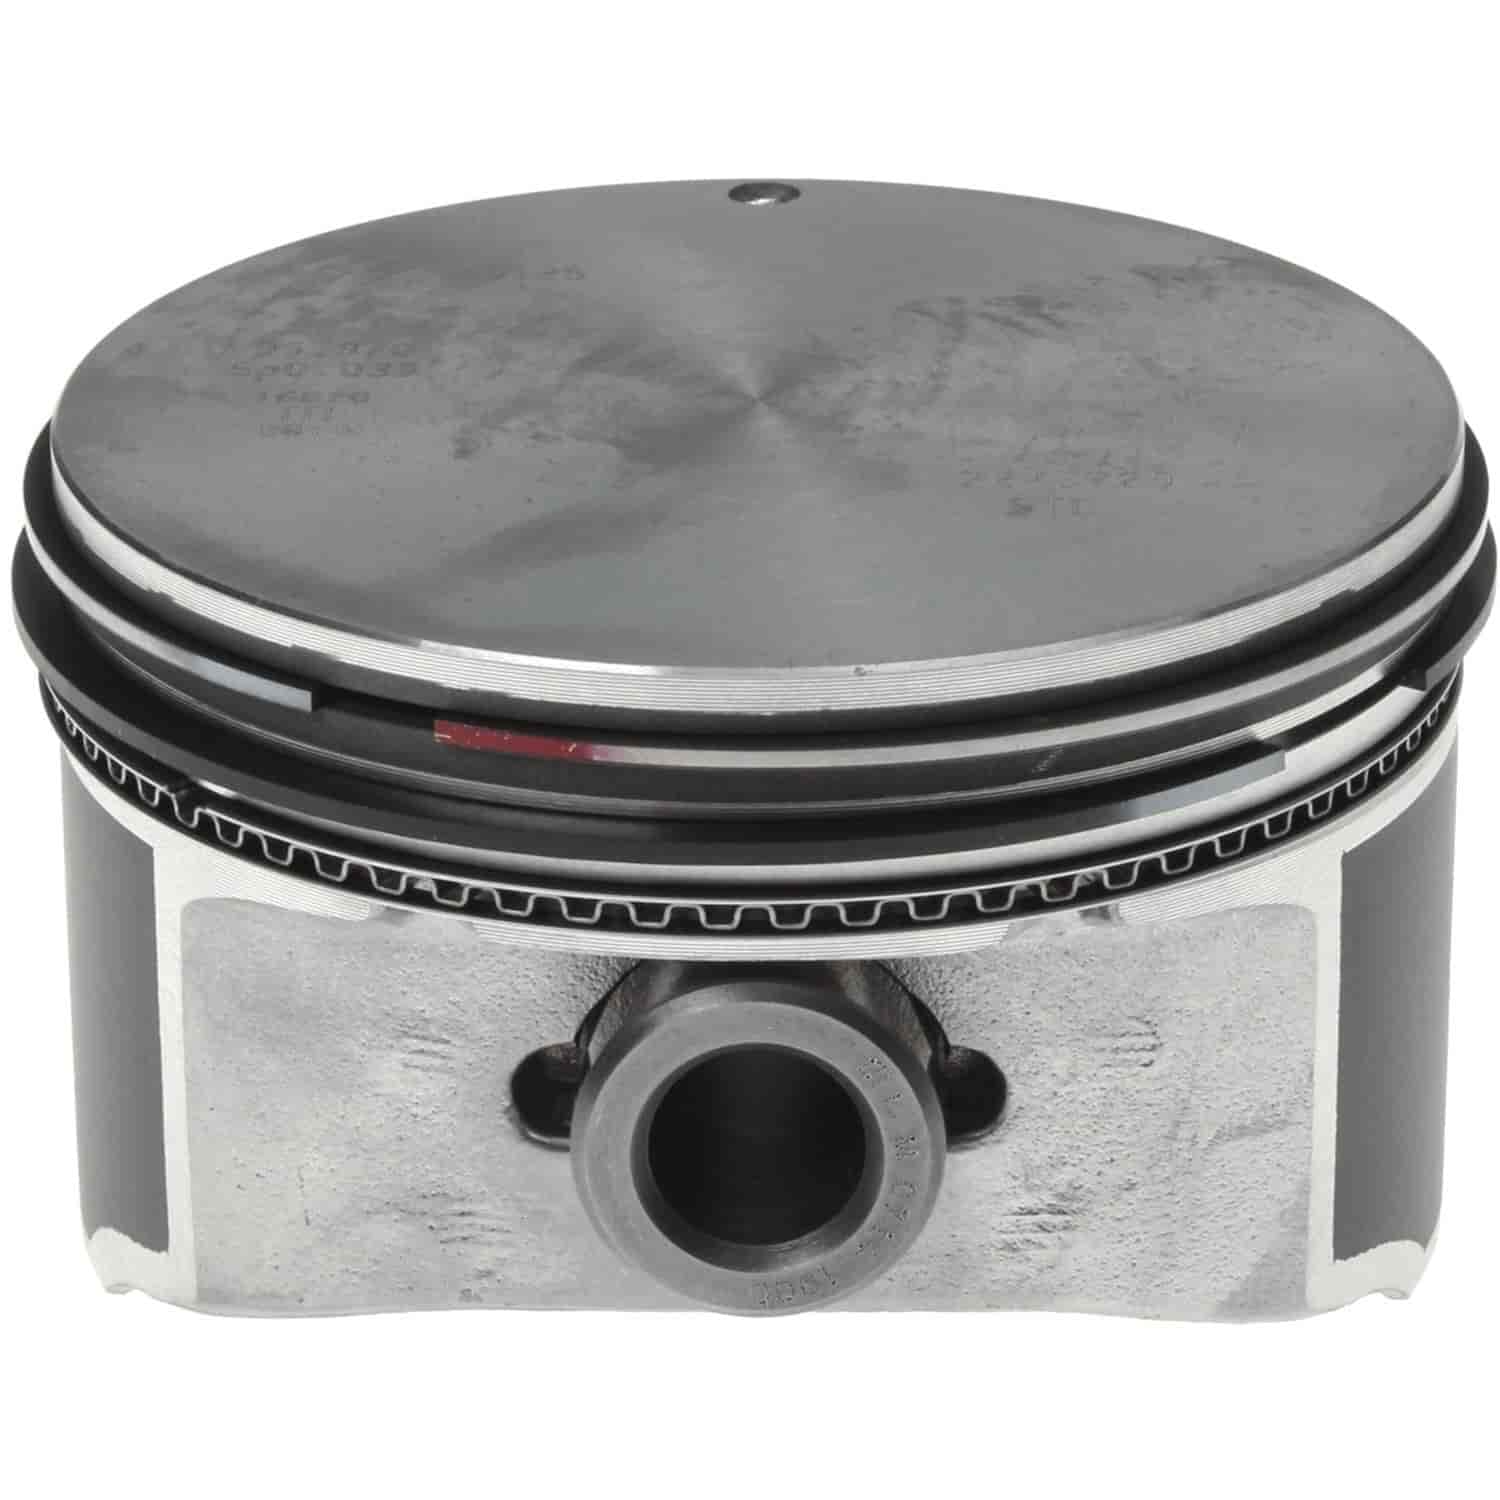 Piston and Rings Set 2005-2009 Chevy LS V8 4.8/5.3L with 3.78"/96.0mm Bore (Standard)